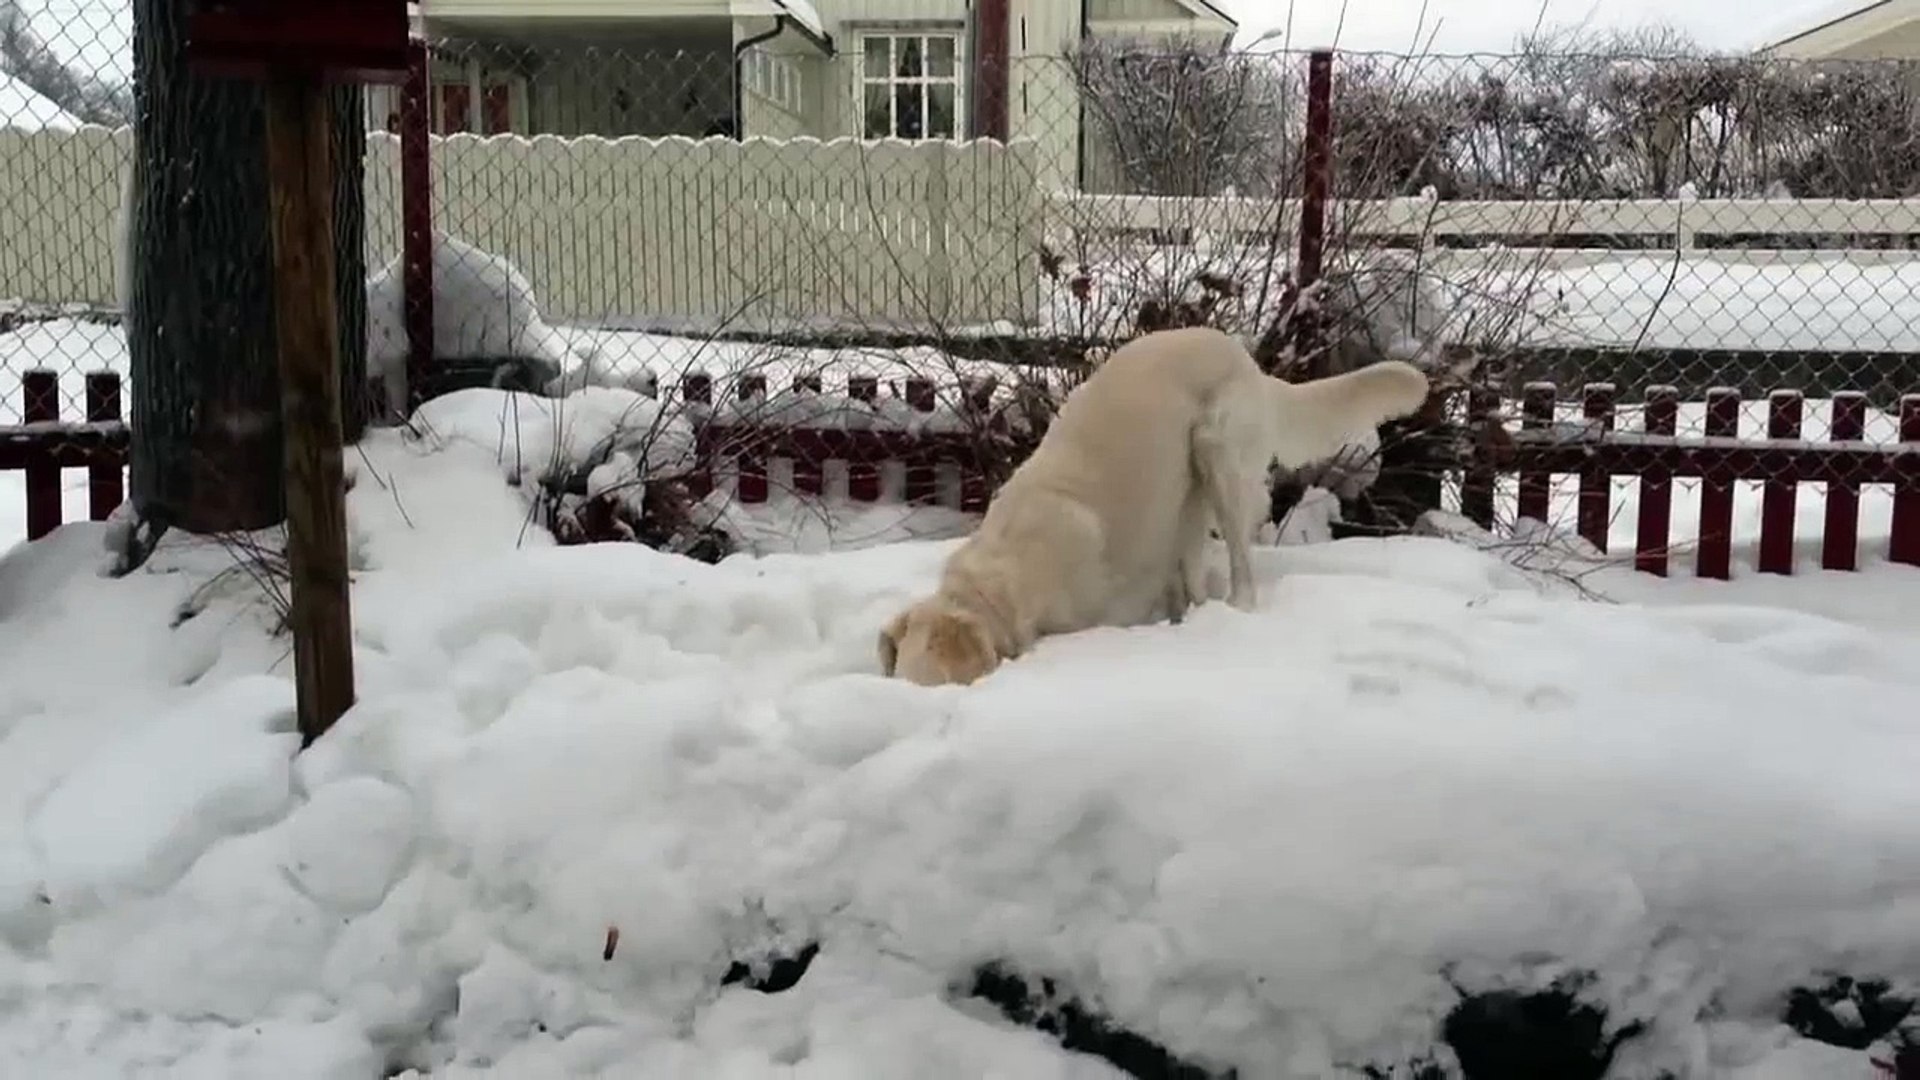 Golden Retriever digging in the snow